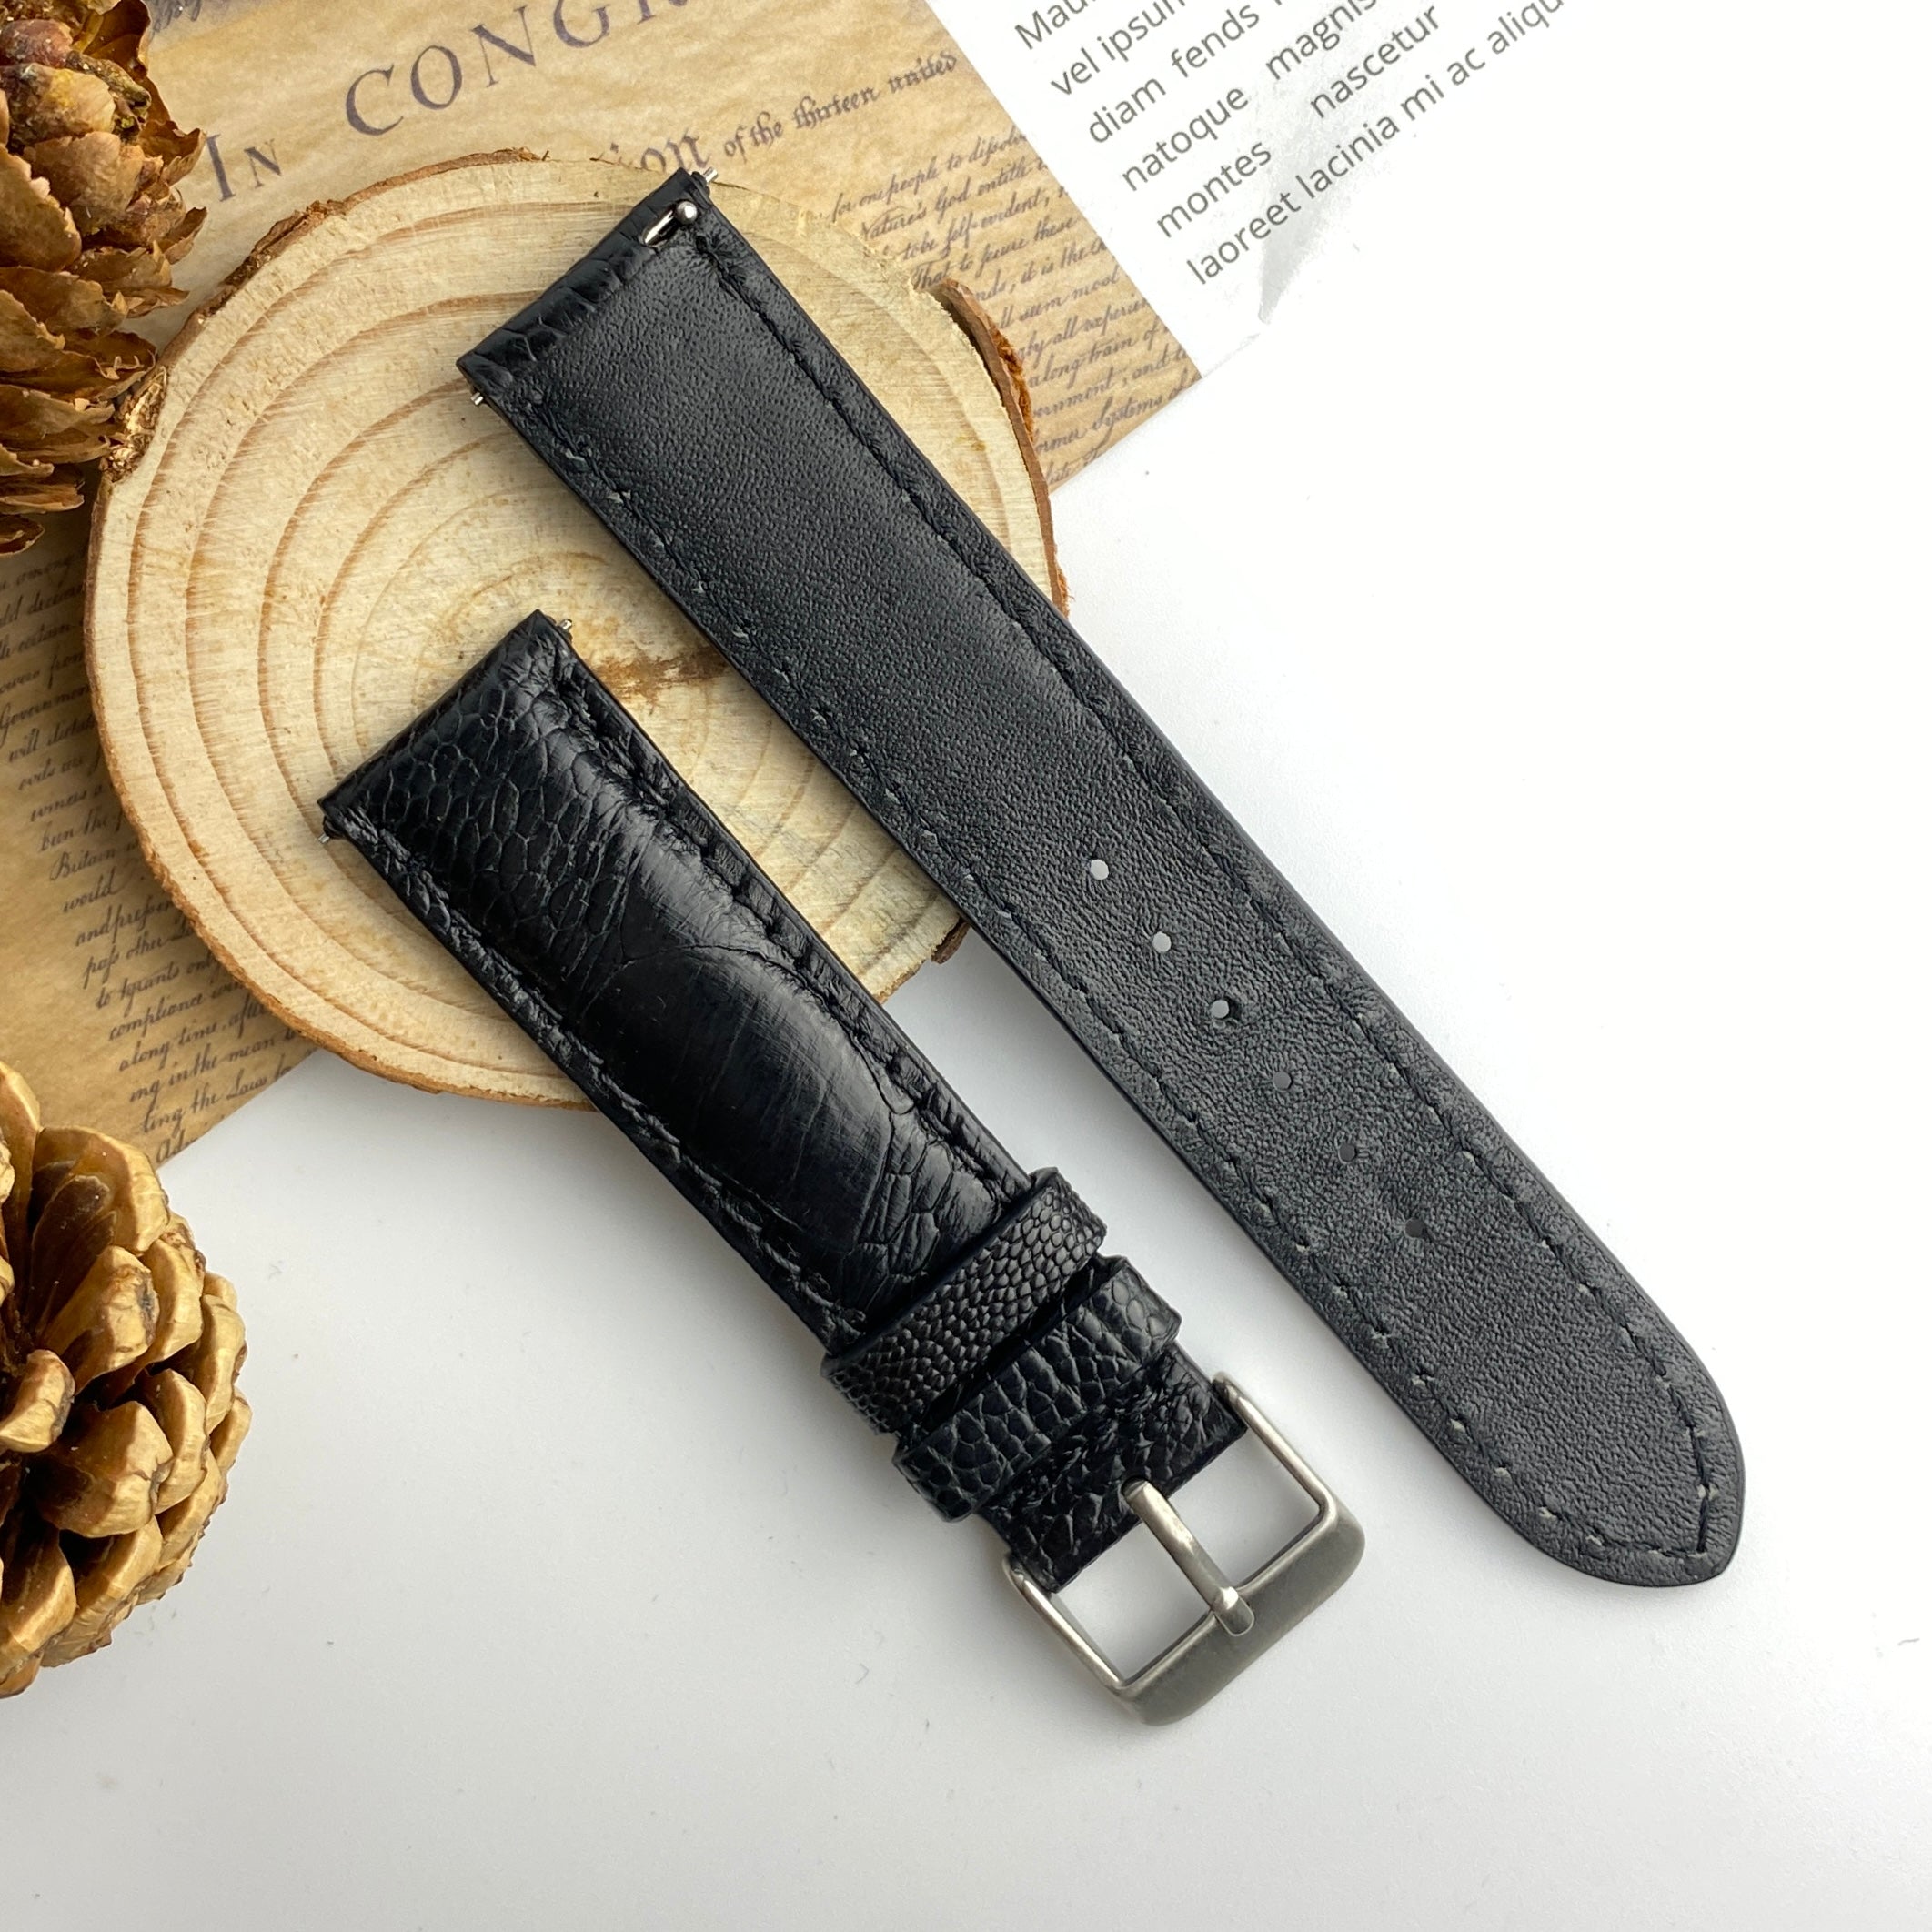 Black Ostrich Skin Watch Strap For Men | Ostrich Leather Wristwatch Strap Quick Release Buckle | DH-34 - Vinacreations